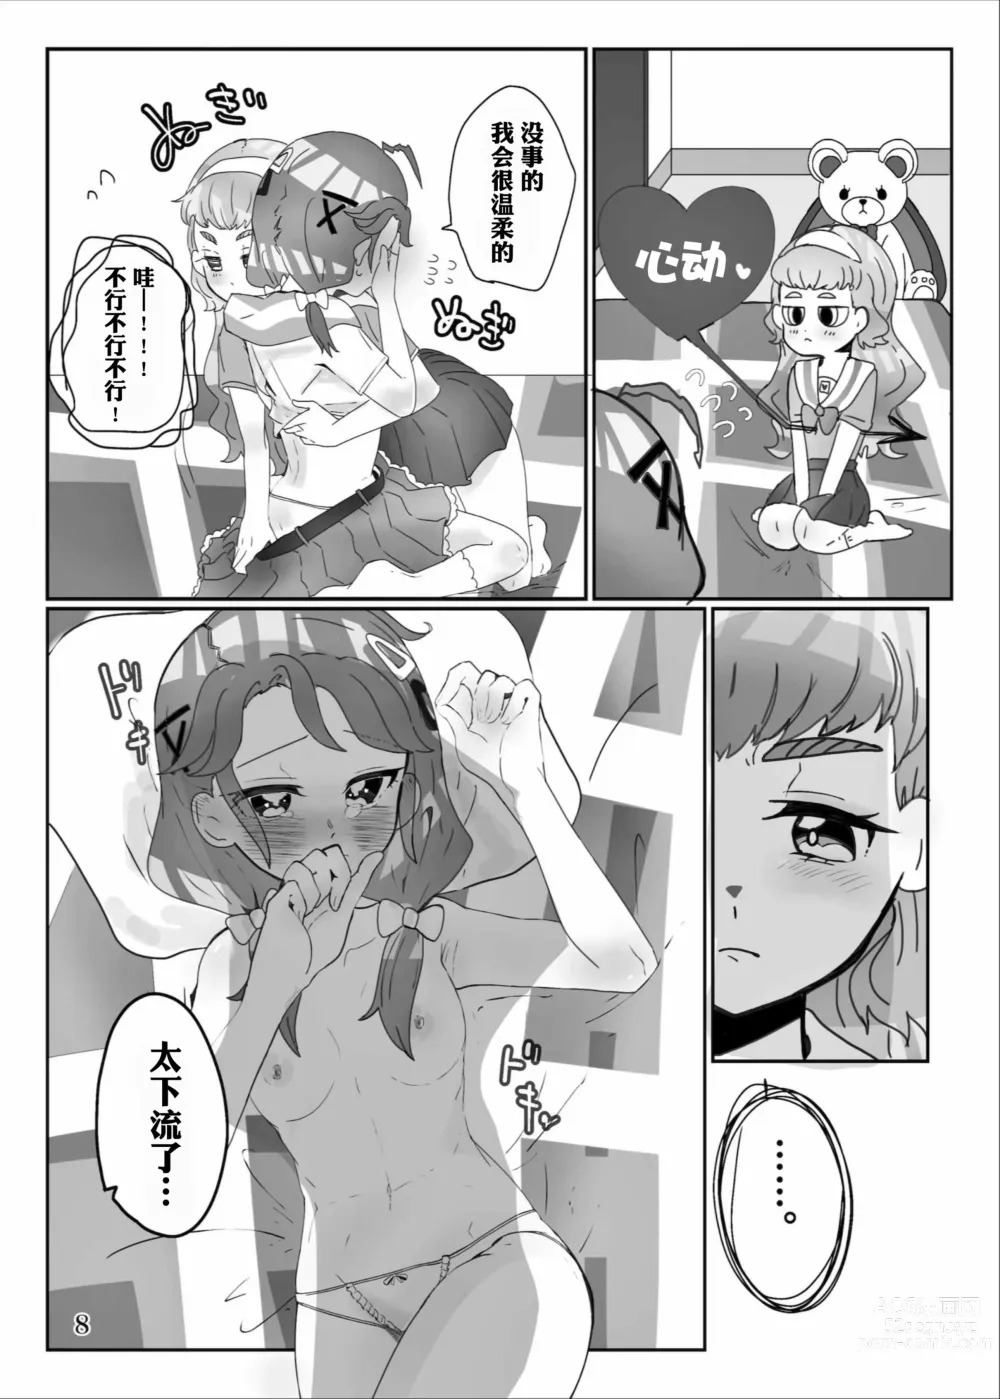 Page 10 of doujinshi 想做能干的孩子♪ DO MY BEST!